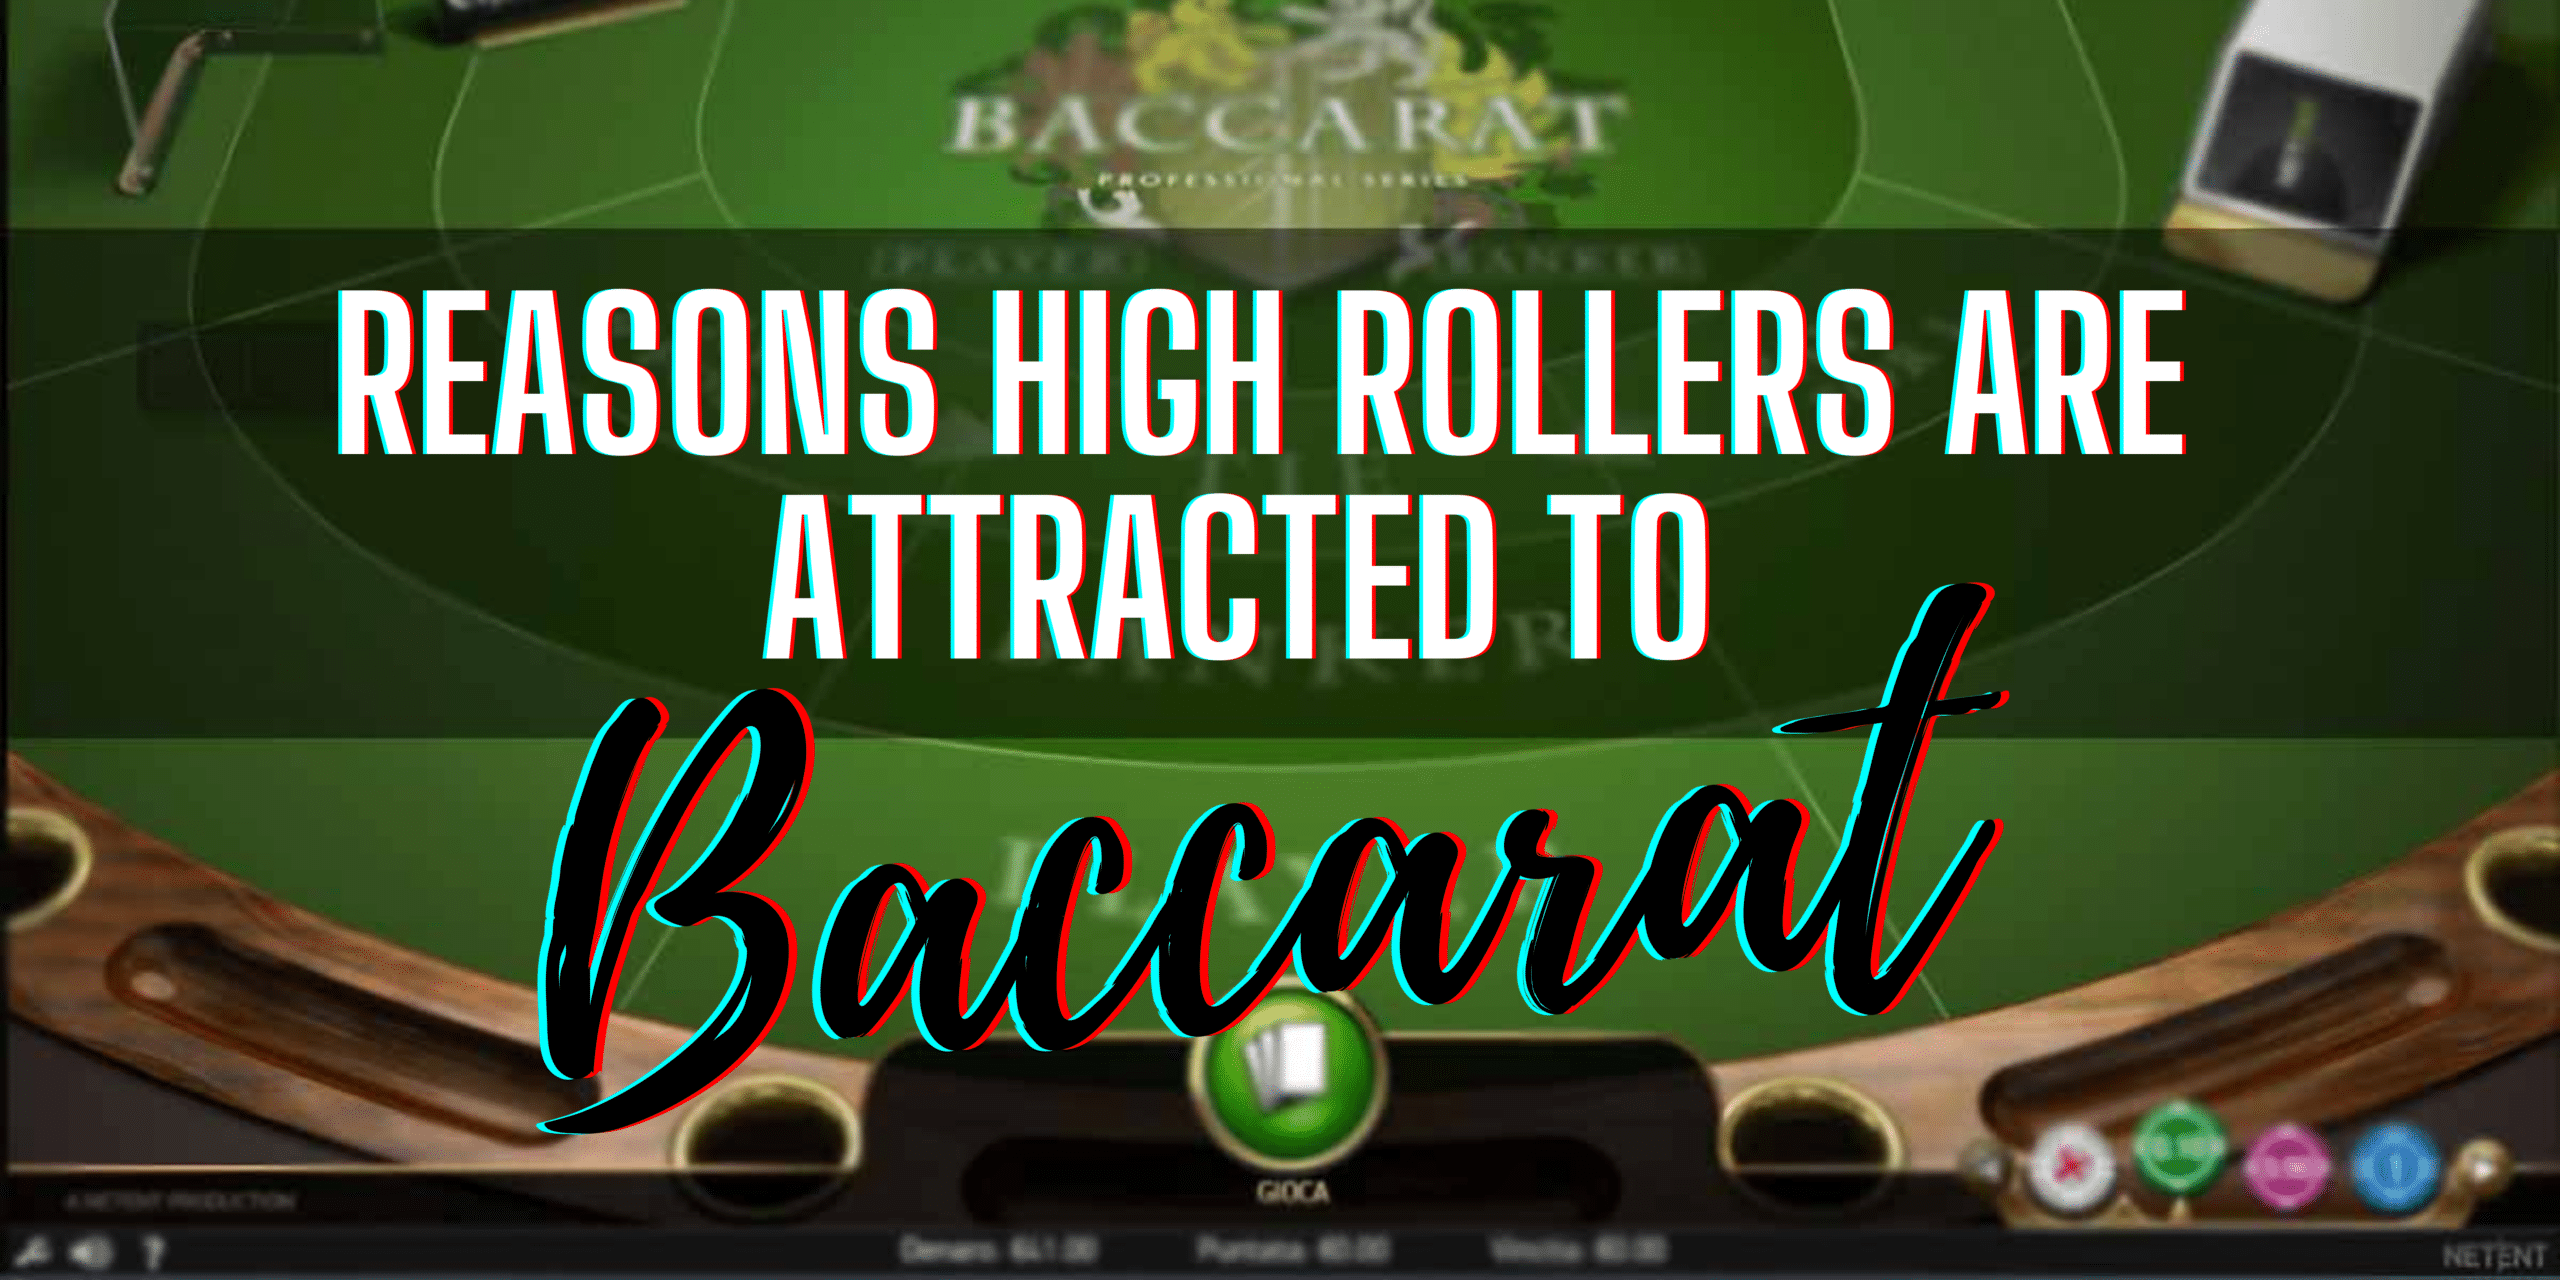 Baccarat: Reasons High Rollers are Attracted to